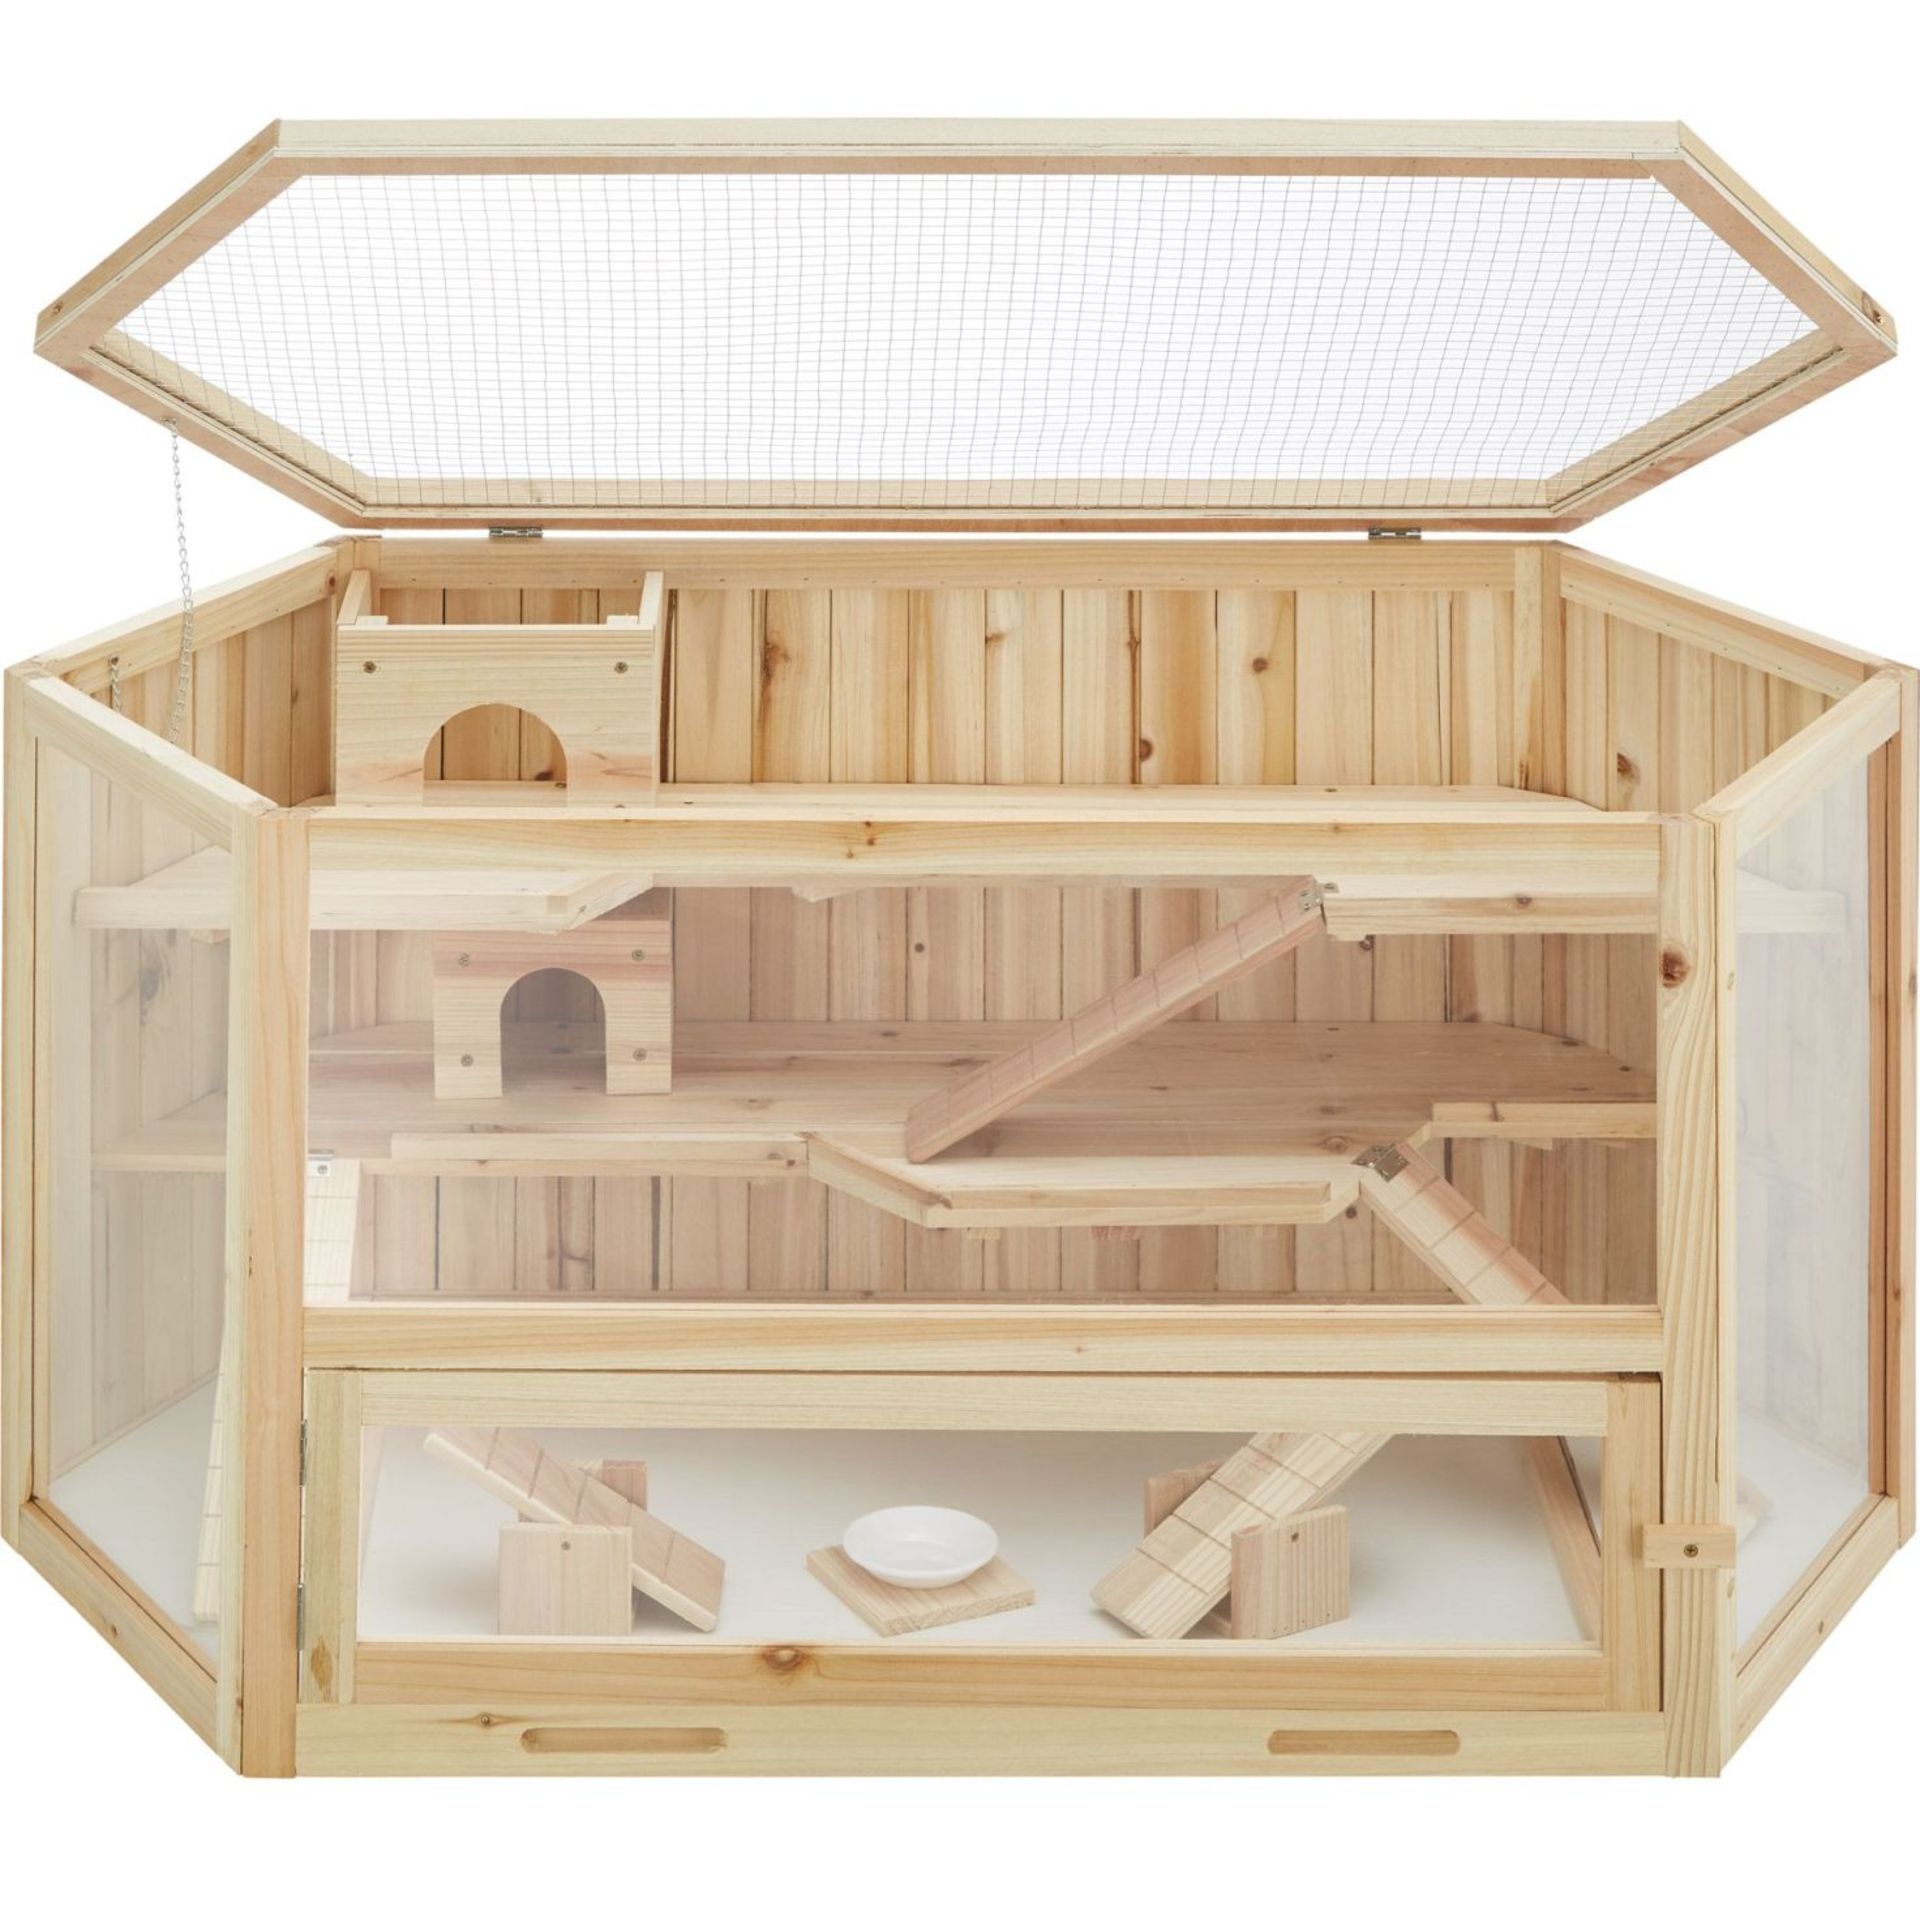 Tectake - Hamster Cage Made Of Wood 115X60X58Cm Brown - Boxed. RRP œ89.99 - Image 2 of 2